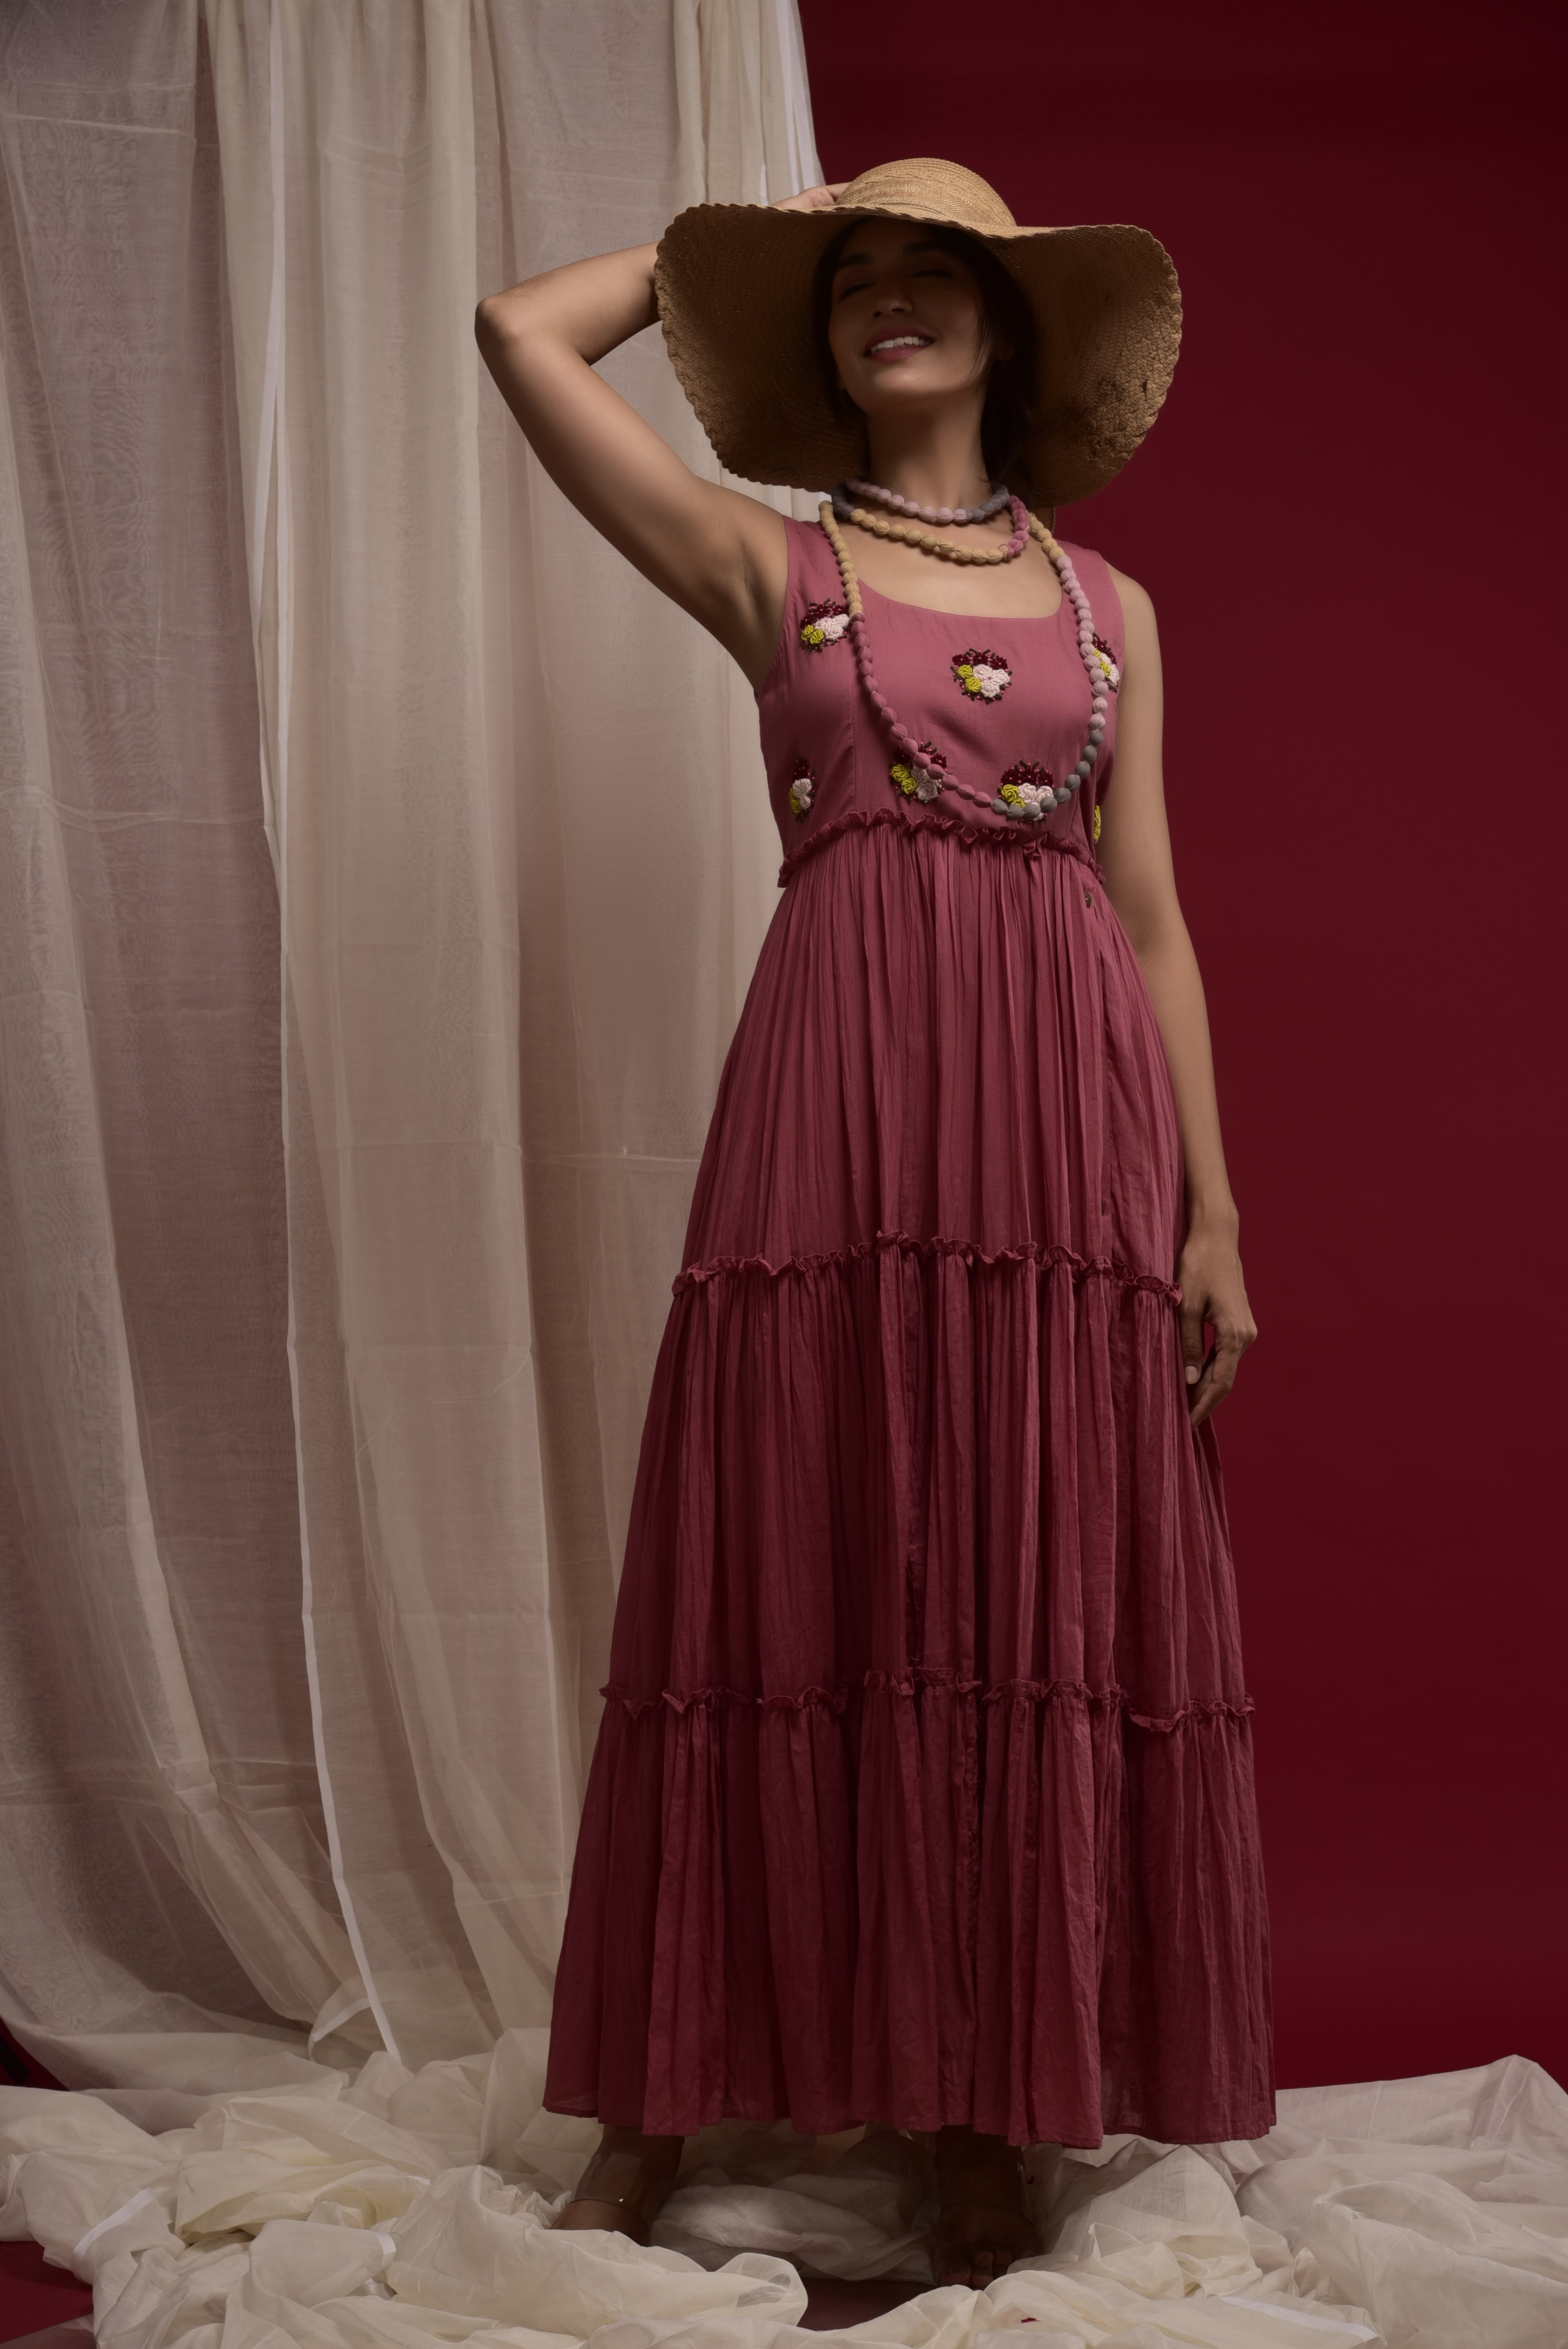 Sleeveless cotton dress with highlighted anchor thread embroidery